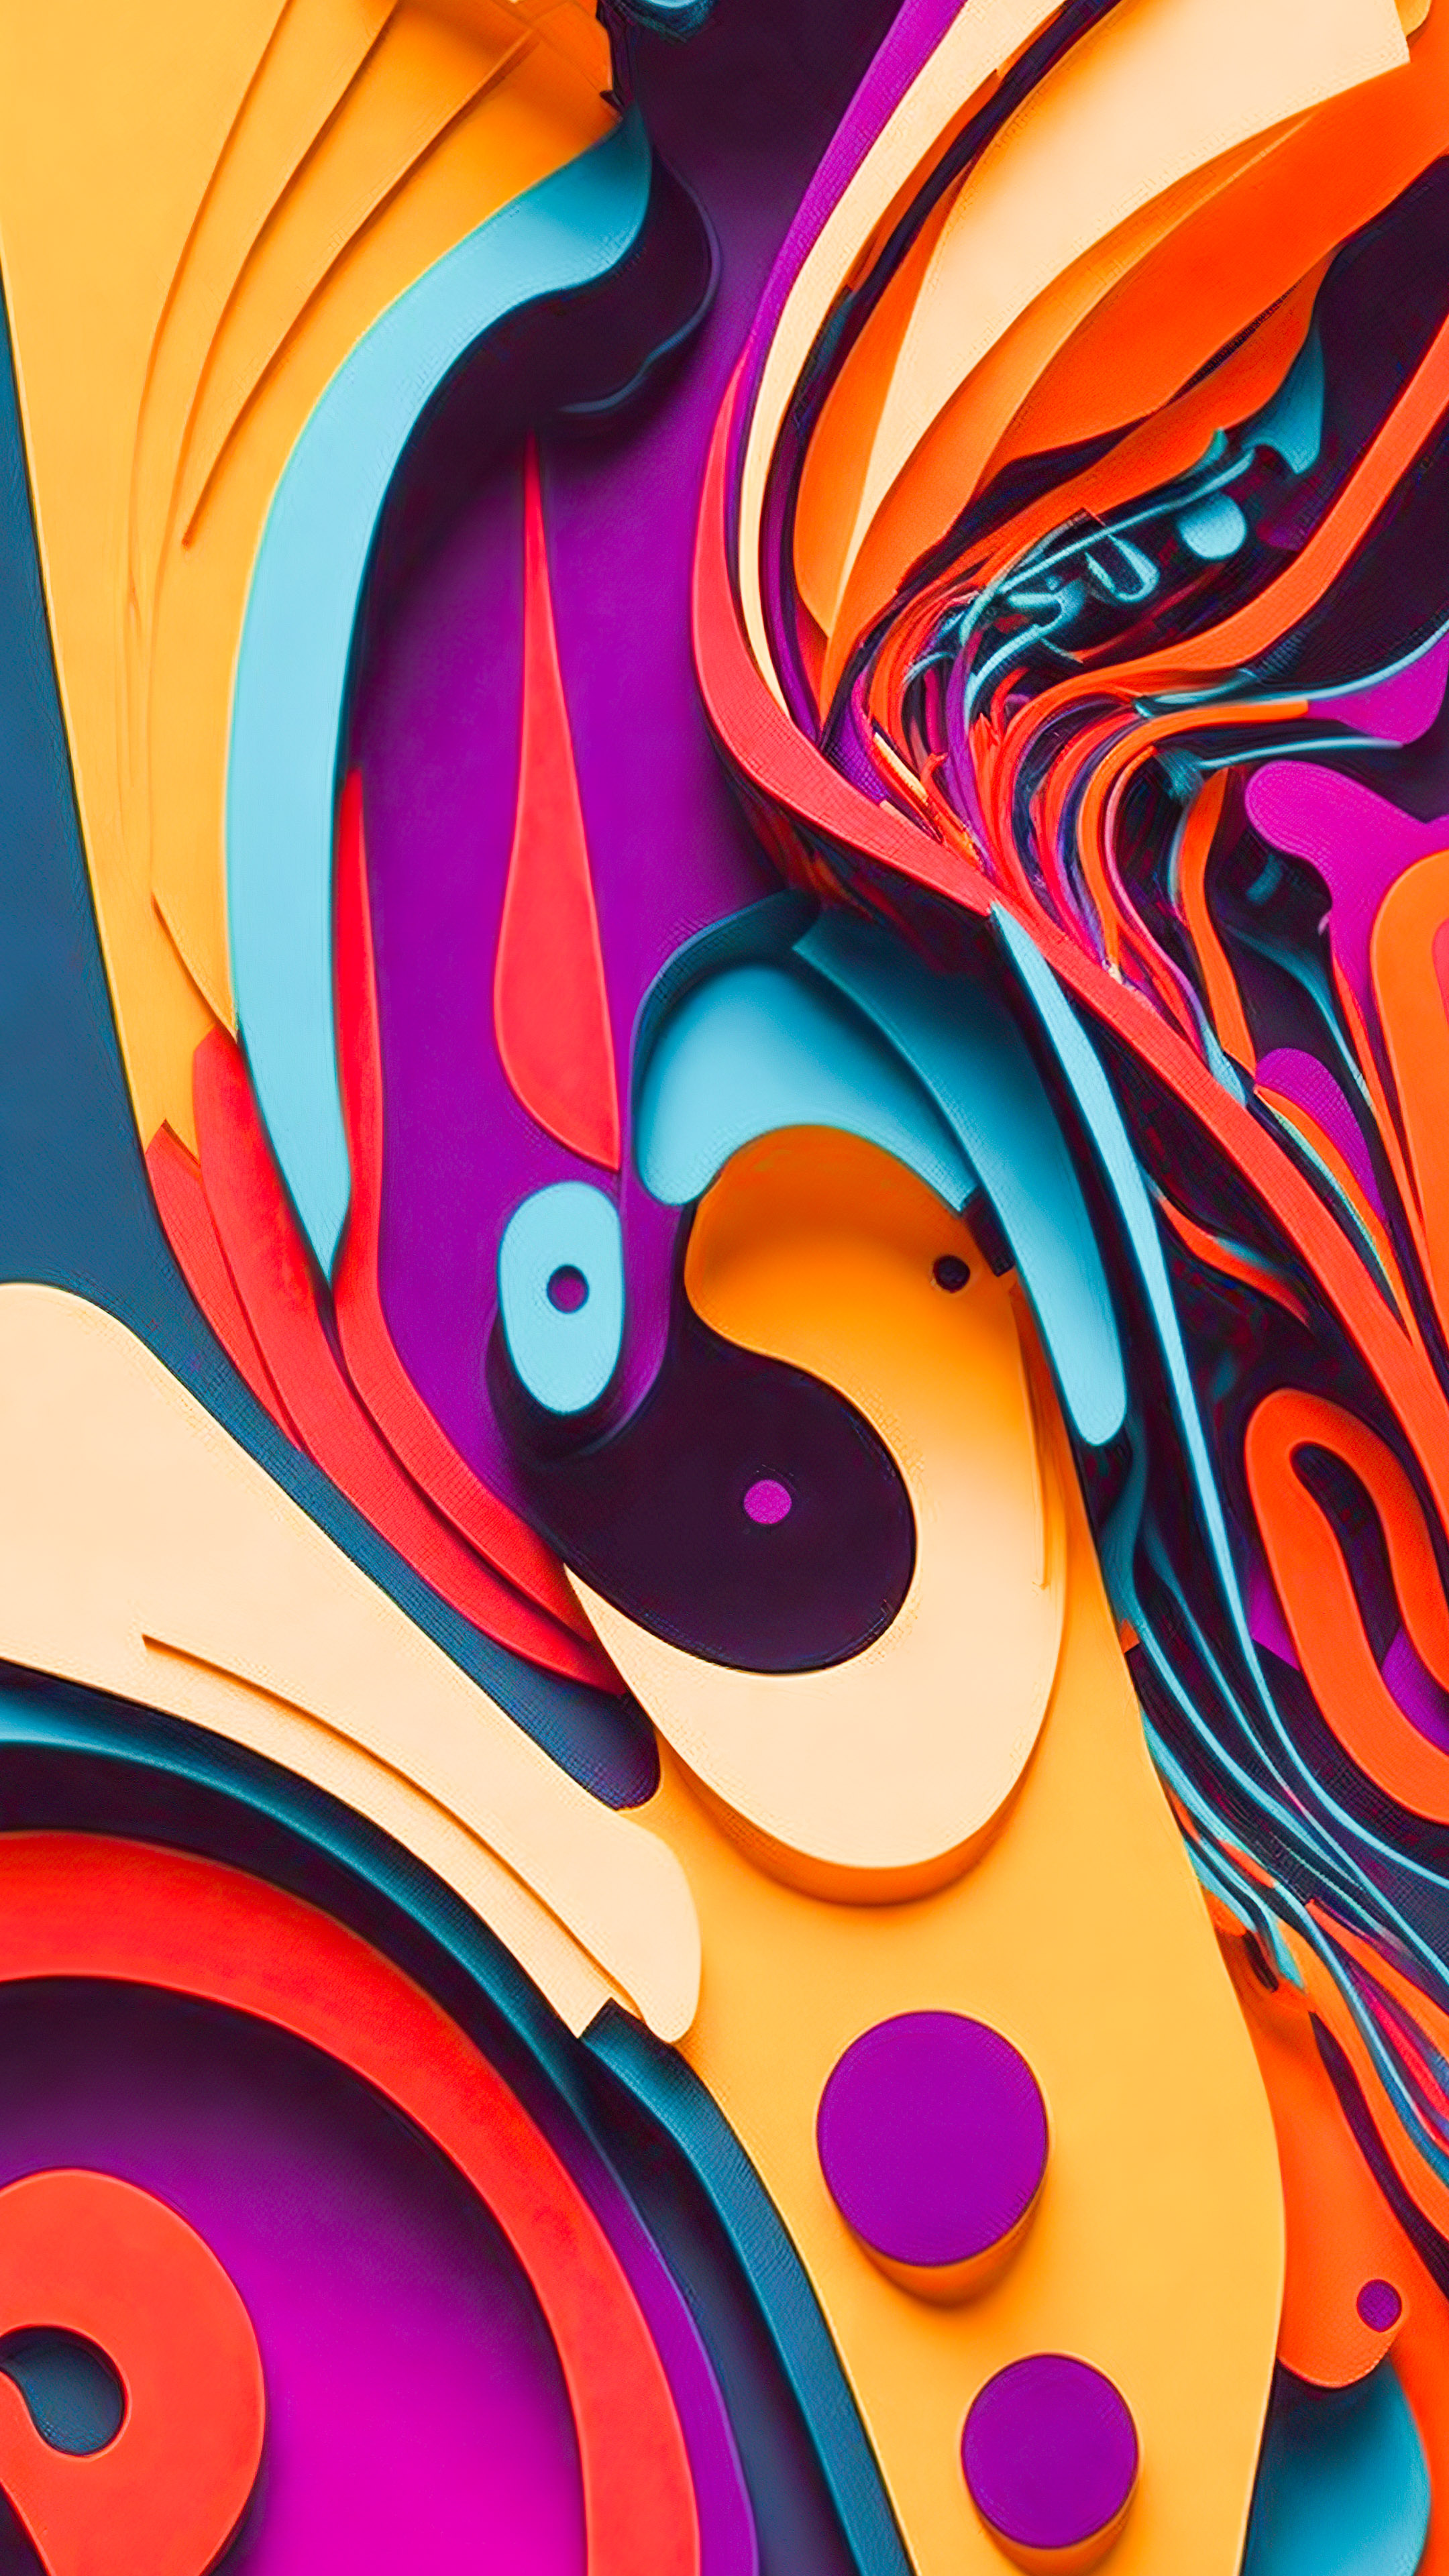 Explore abstract art mobile wallpaper with dynamic shapes and bold colors, creating an immersive visual experience.